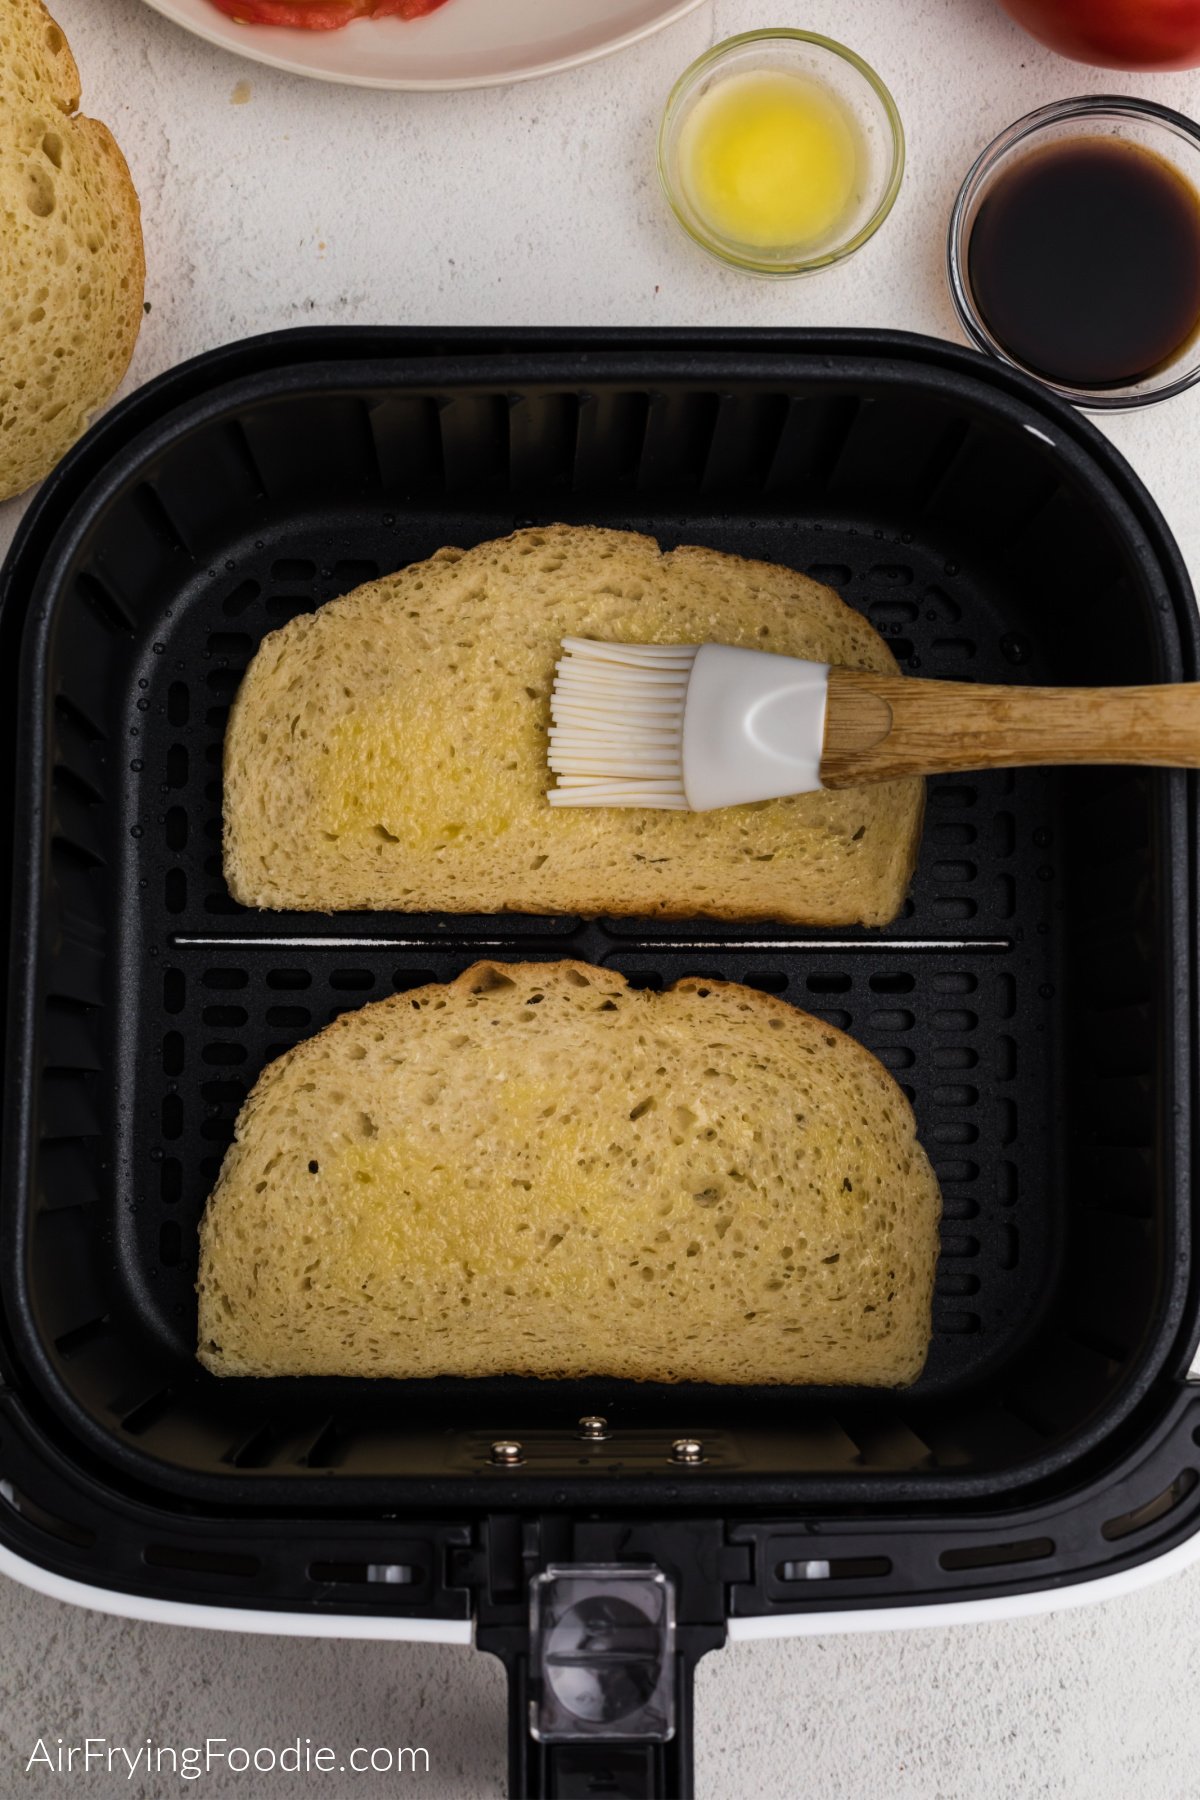 Brushing a light coat of butter onto sourdough bread in the air fryer basket.